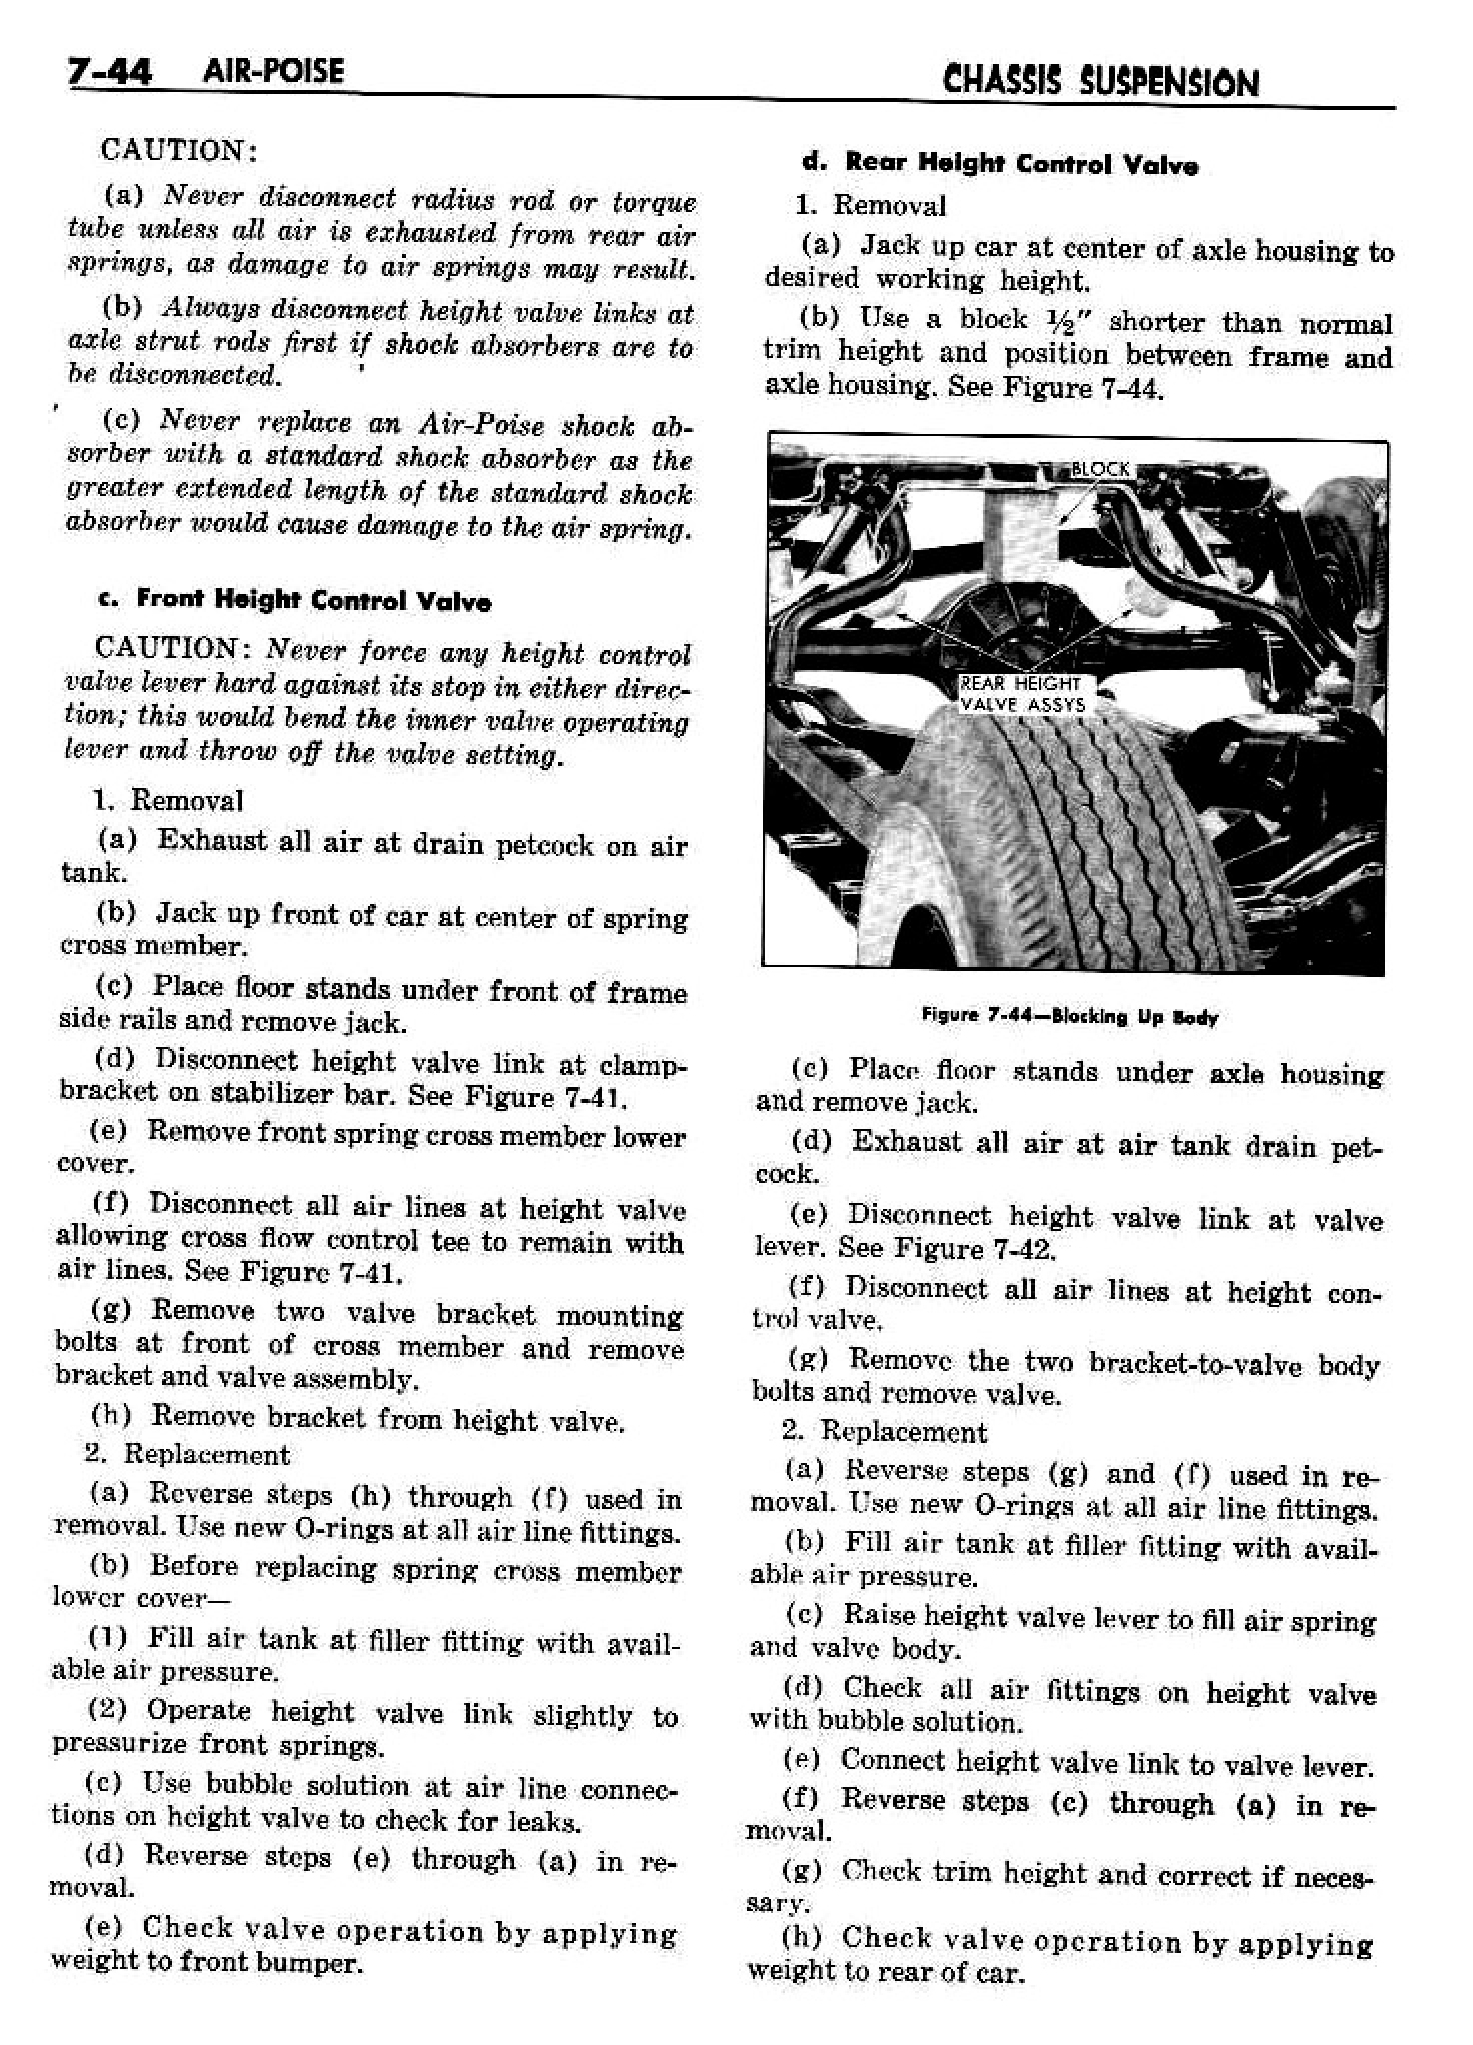 n_08 1958 Buick Shop Manual - Chassis Suspension_44.jpg